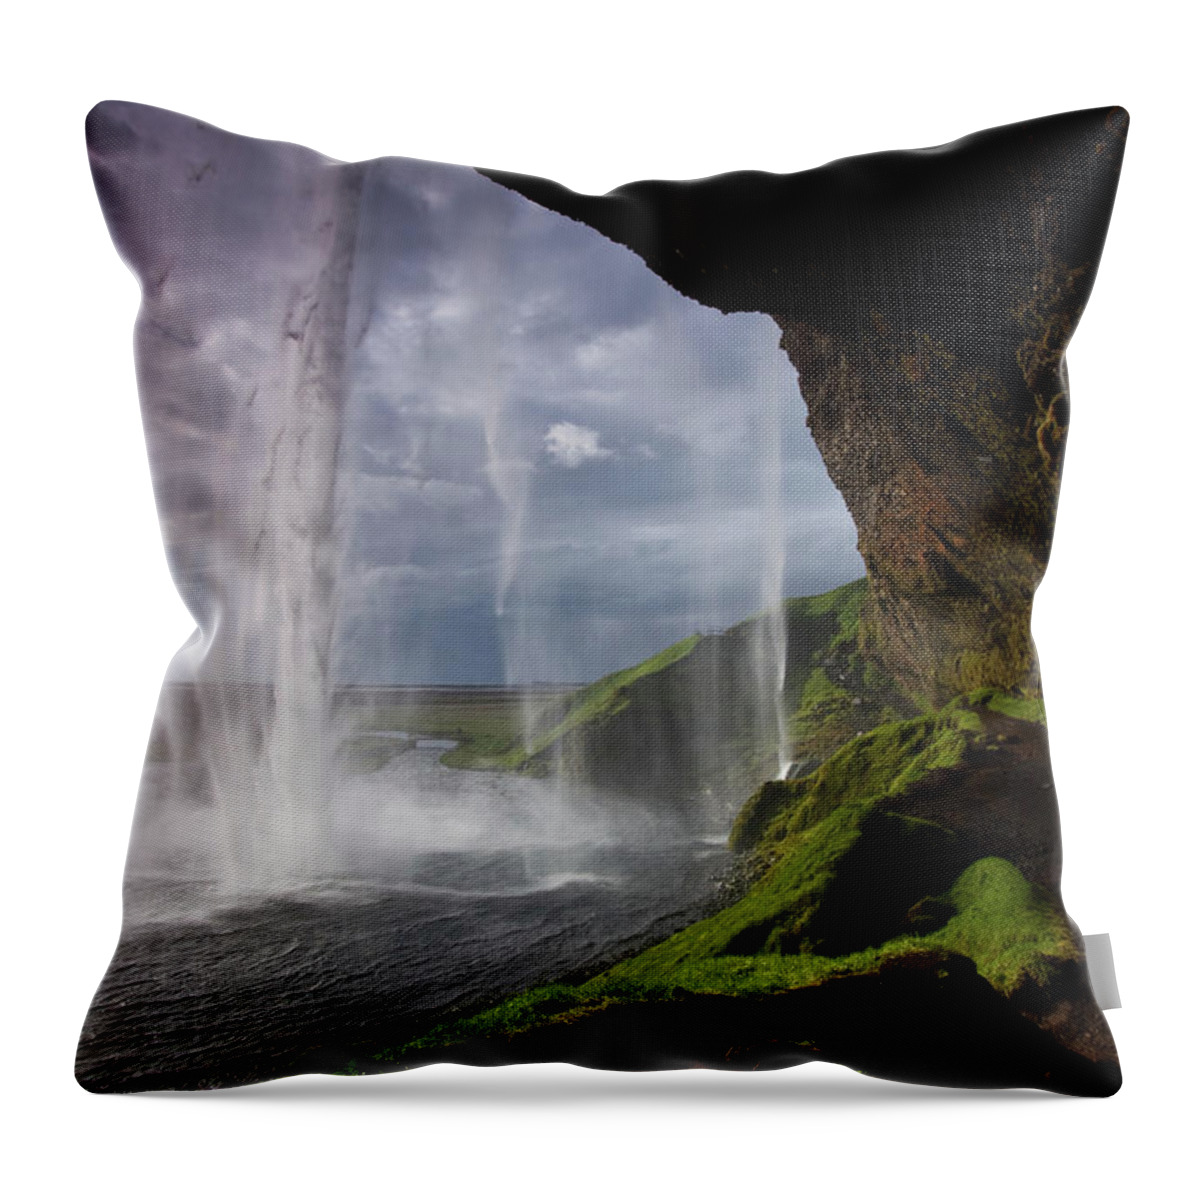 Scenics Throw Pillow featuring the photograph Seljalandsfoss Waterfall In Iceland by Esen Tunar Photography